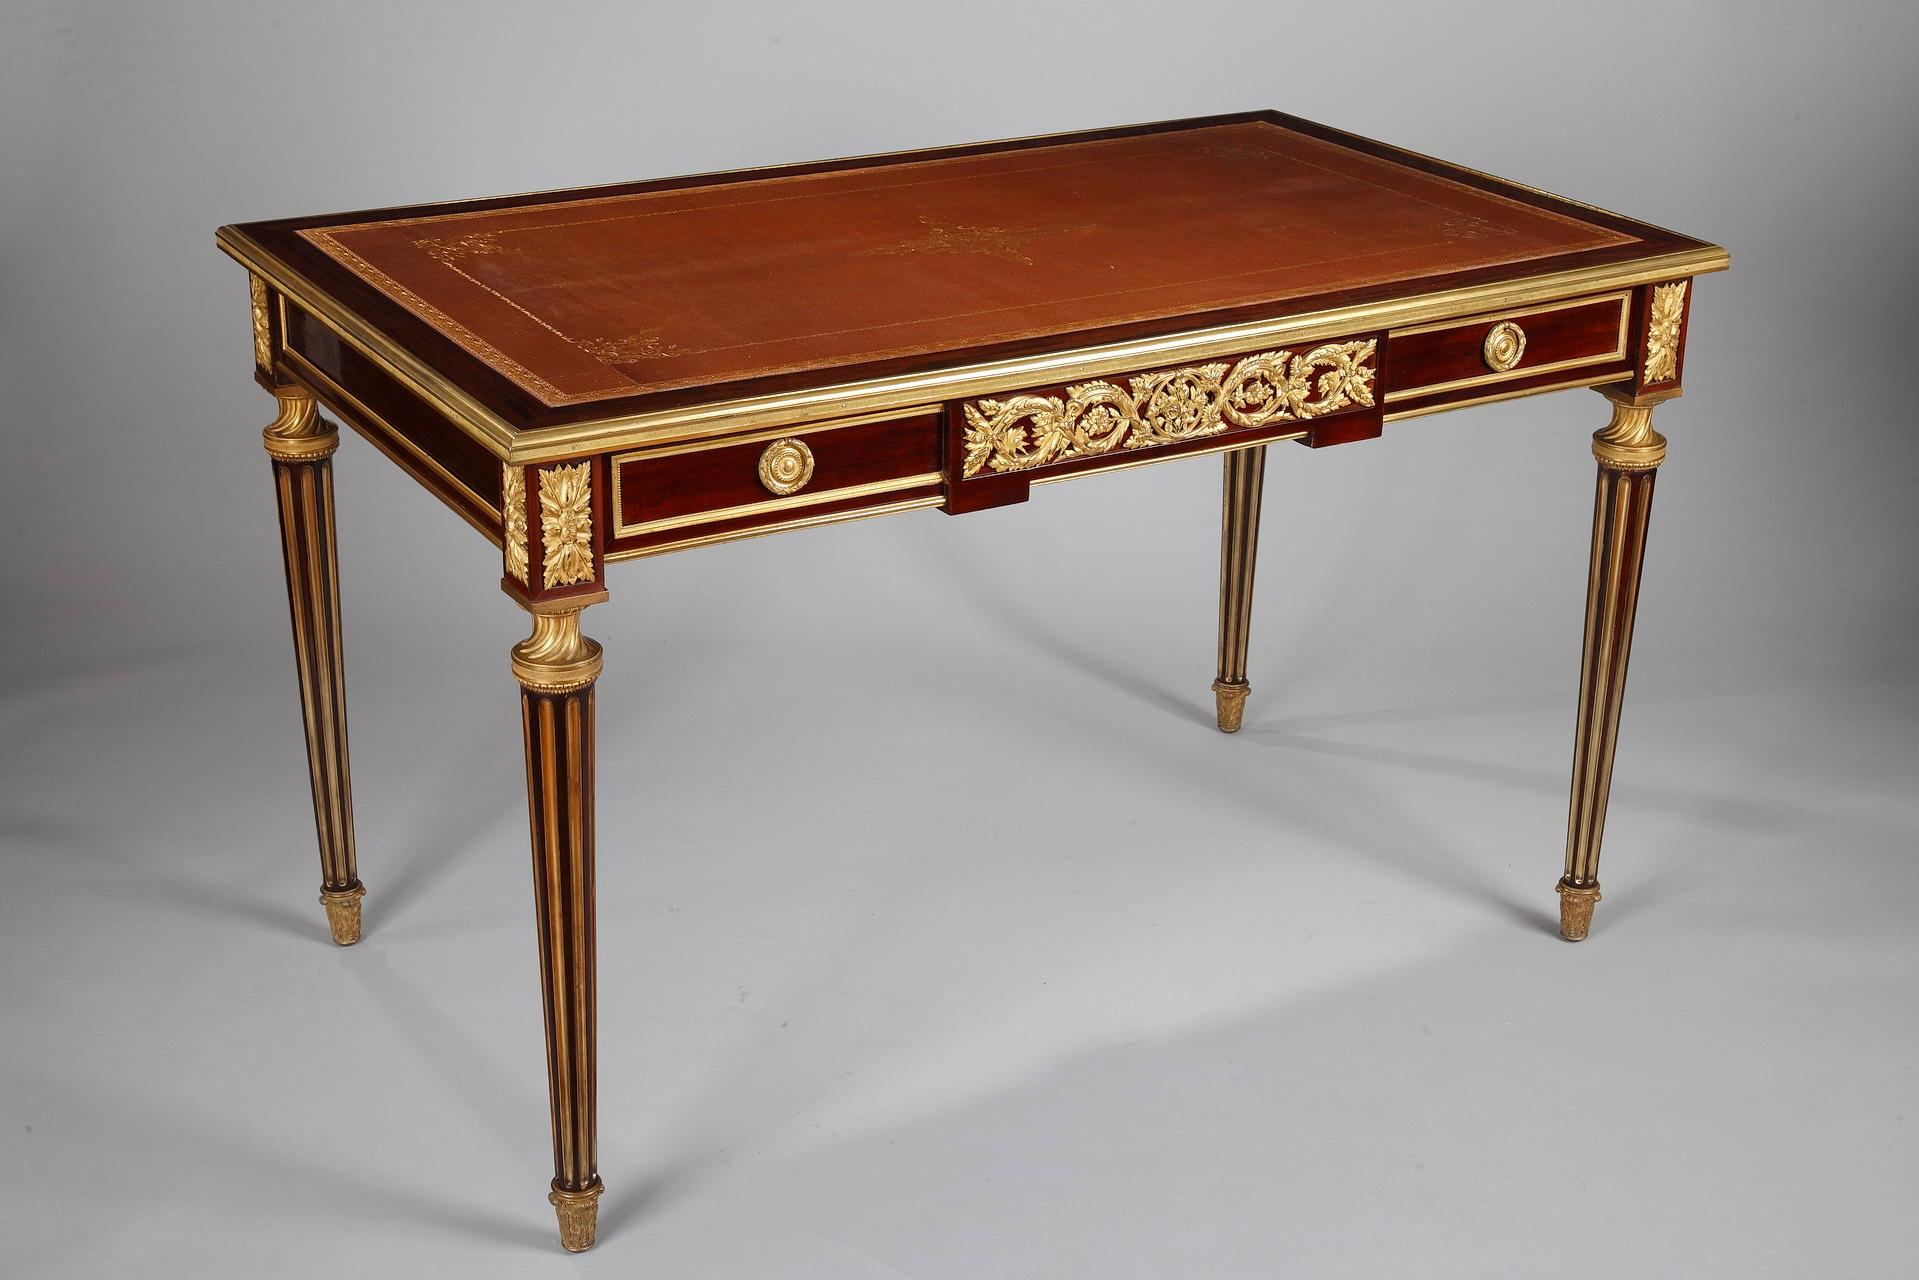 Signed on the keylock P. SORMANI PARIS, 10 r. Charlot

Elegant Louis XVI style flat desk in veneered wood and gilded bronze sheathed on the top of a havane patiné leather. Molded and decorated on every side with a rich ornamentation in gilded